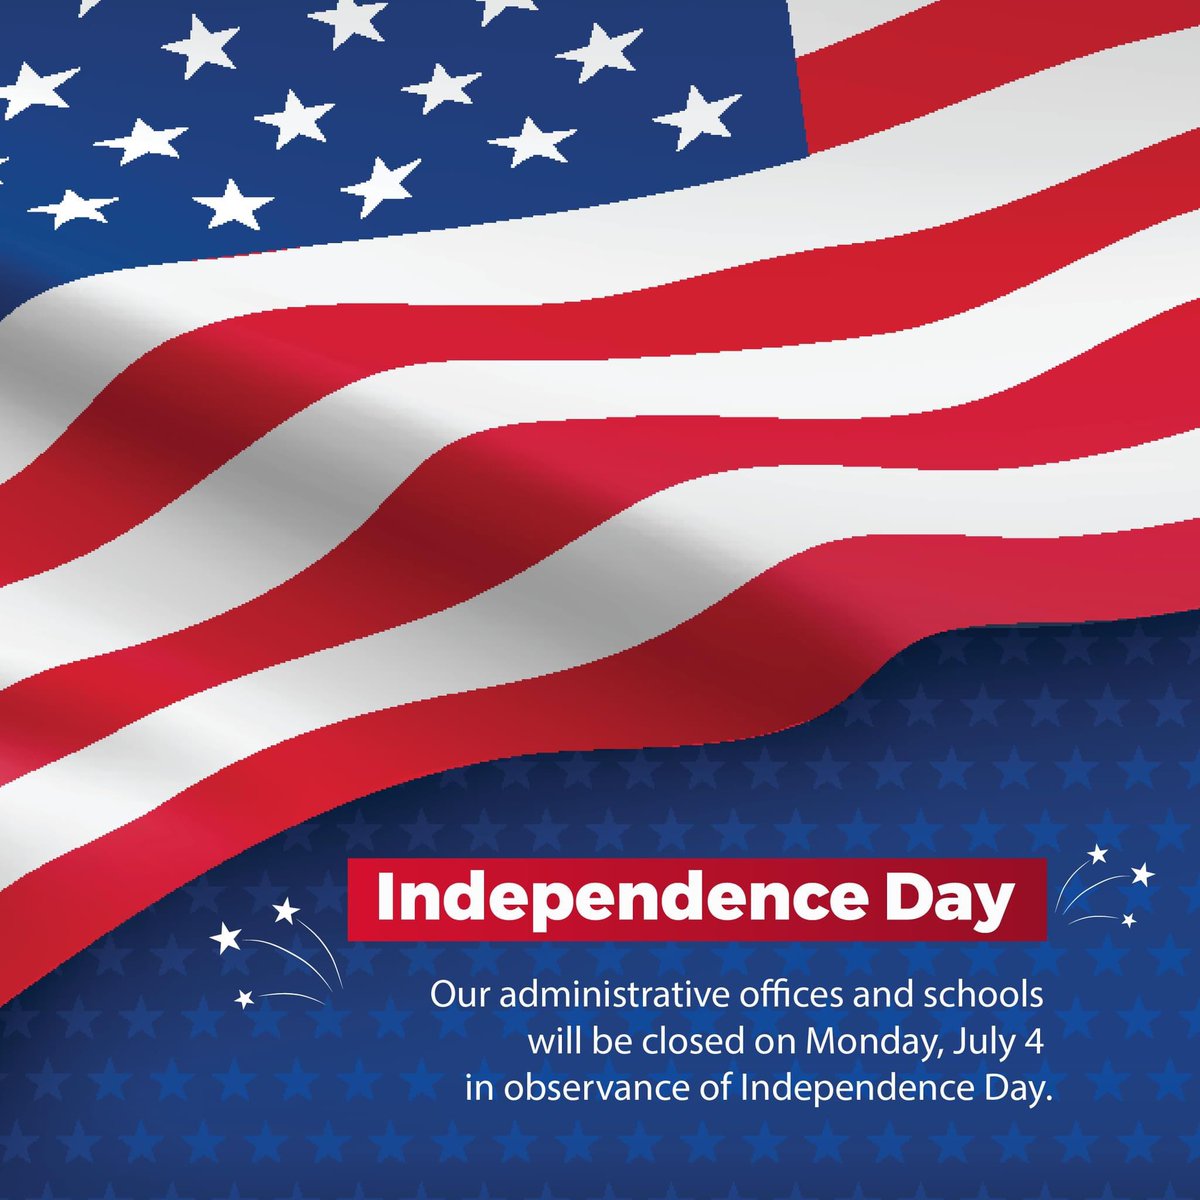 From the Richmond County School System| The Richmond County School System will be closed on Monday, July 4 in observance of Independence Day. All offices and schools will reopen on their normal schedules on Tuesday, July 5.